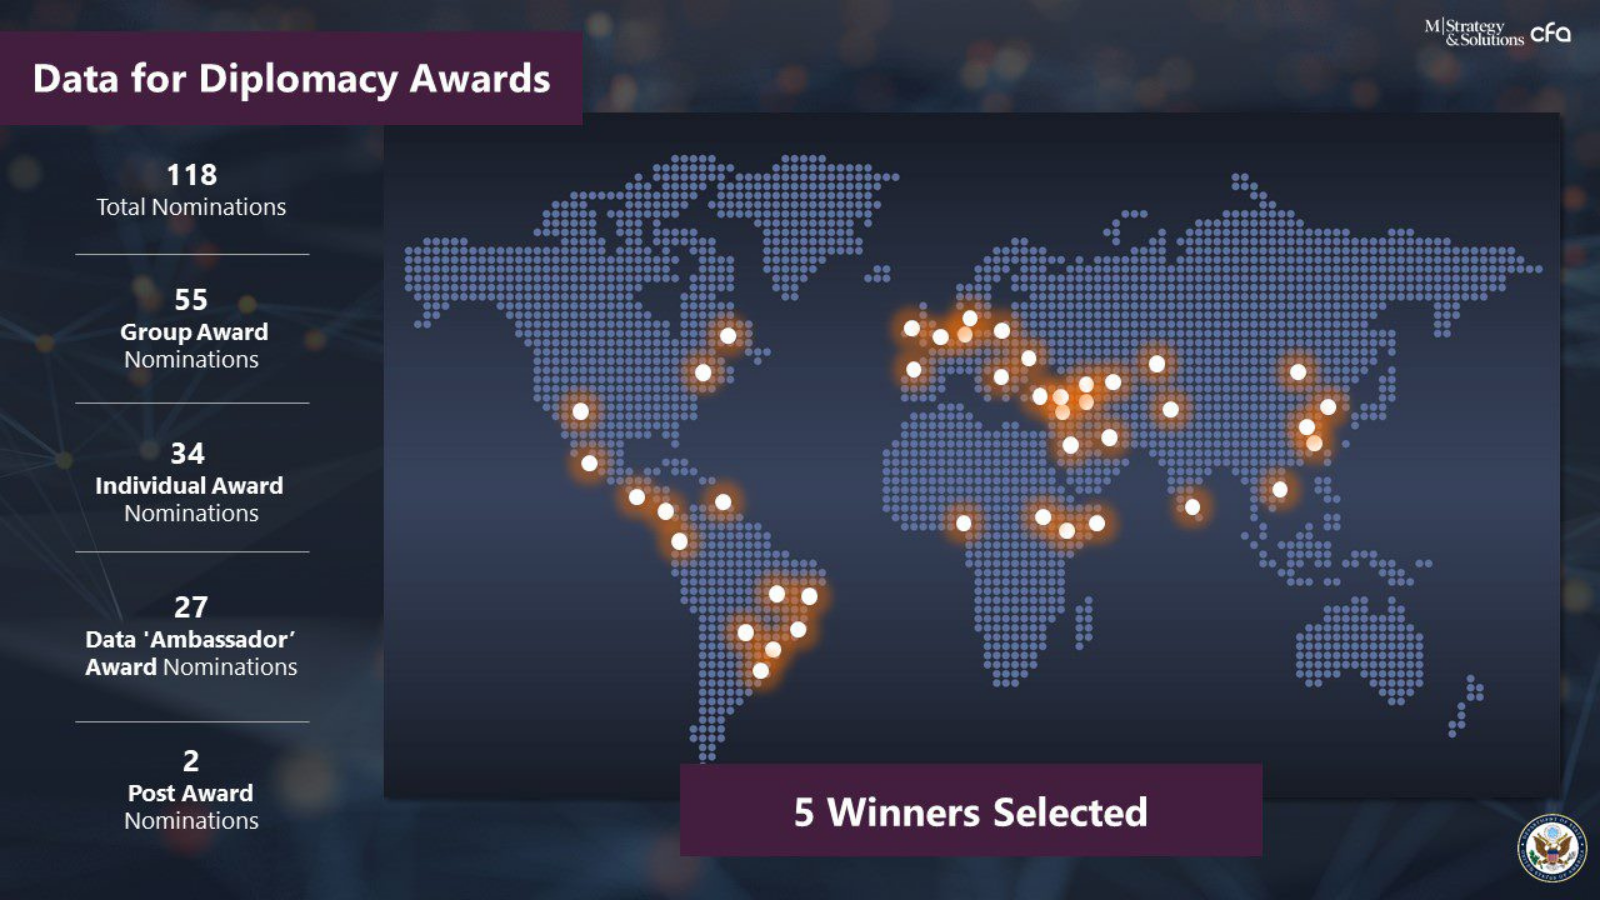 Image is of a global map with pins to recognize the 42 locations where the Data for Diplomacy Award winners are located. Text to the left of the map includes statistics about the winners and nominations, including: 118 Total Nominations, 55 Group Award Nominations, 34 Individual Award Nominations, 27 Data Ambassador Award Nominations, and 2 Post Award Winners. Text at the bottom says 5 Winners Selected.